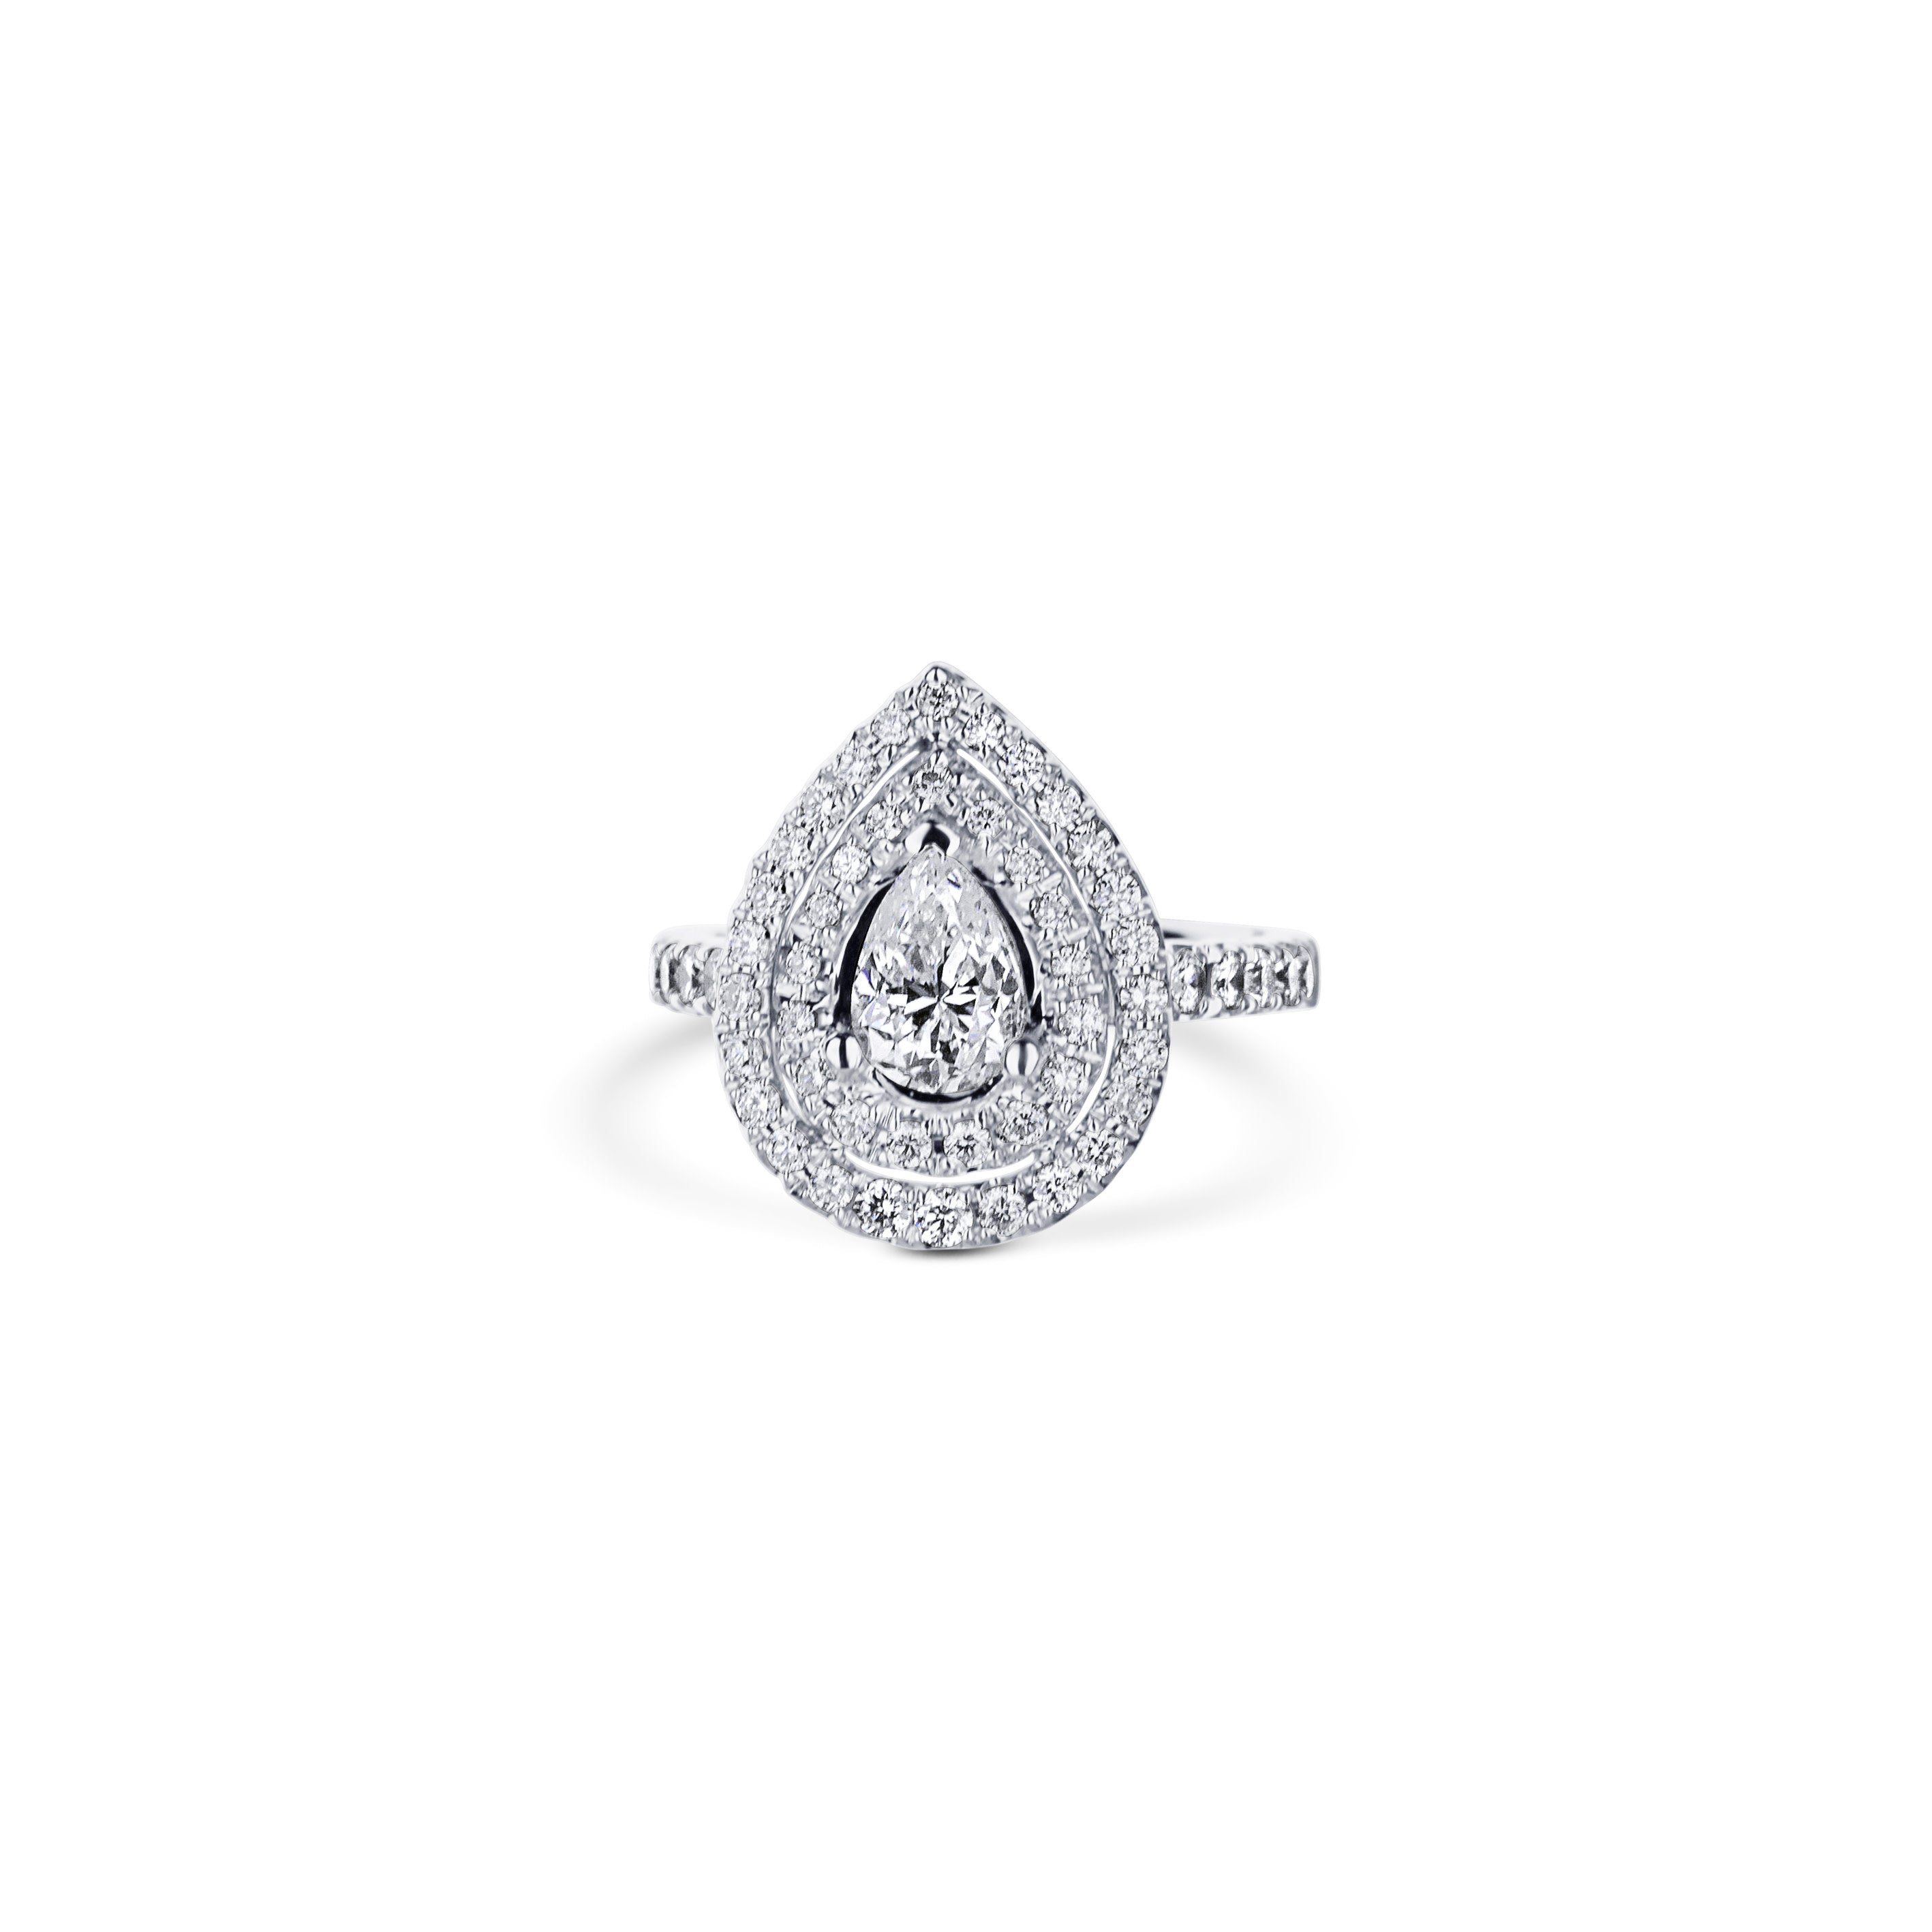 18K White Gold Double Halo Pear Diamond Engagement Ring